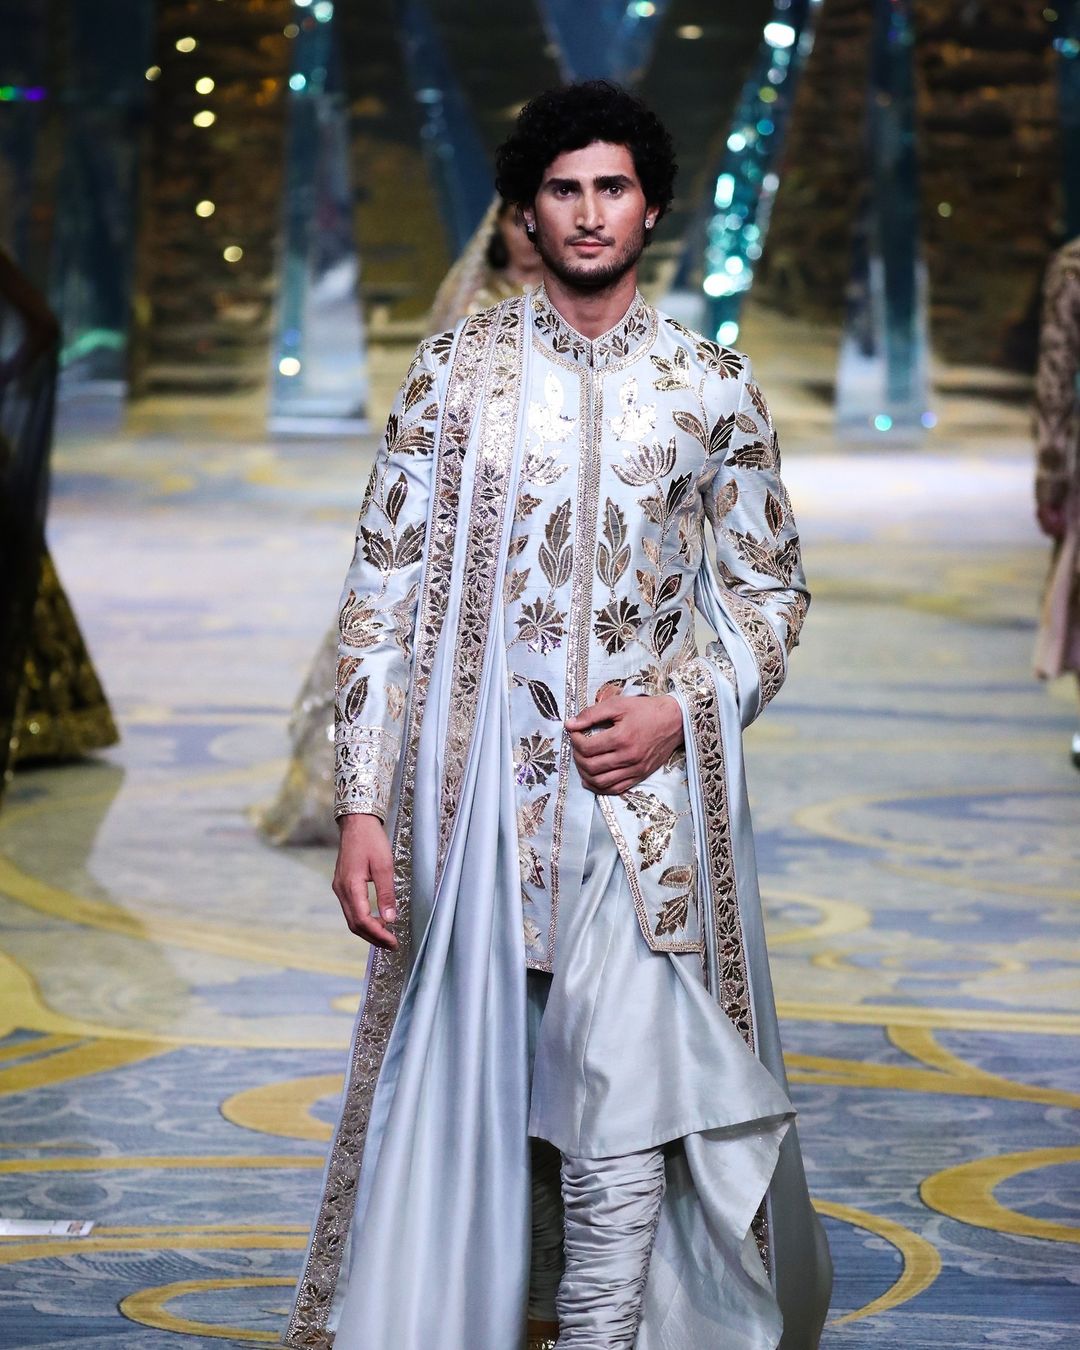 Manish Malhotra Heralds In The Era Of The Bold Bride With His Latest Couture Collection: Major mughal vibes. Photo Credit: www.instagram.com